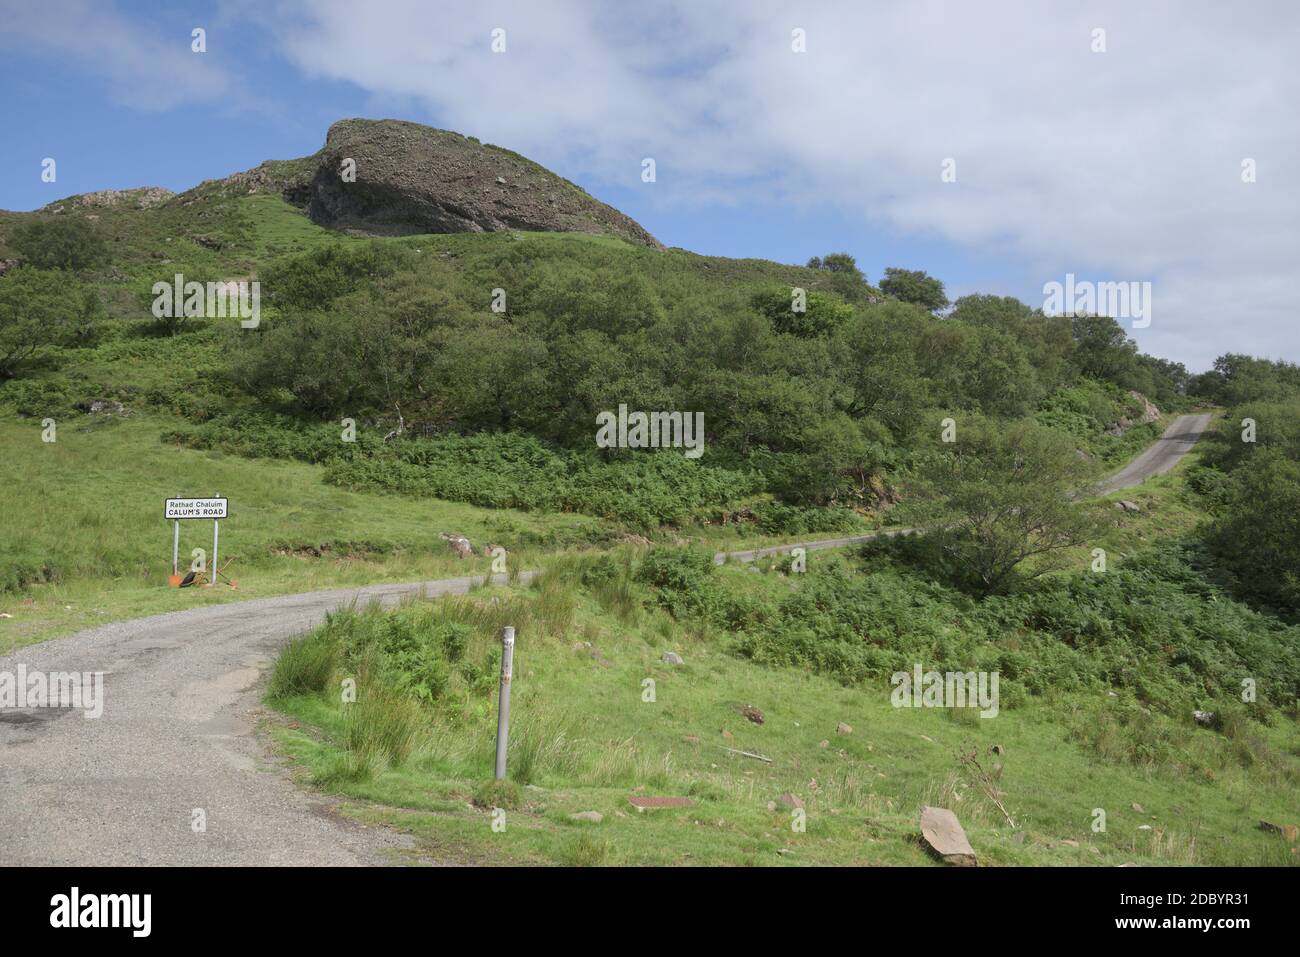 Calum's road sweeps through this image. Taken on a sunny day on the isle of raasay, the lush foliage surrounding the historic road looks good. Stock Photo